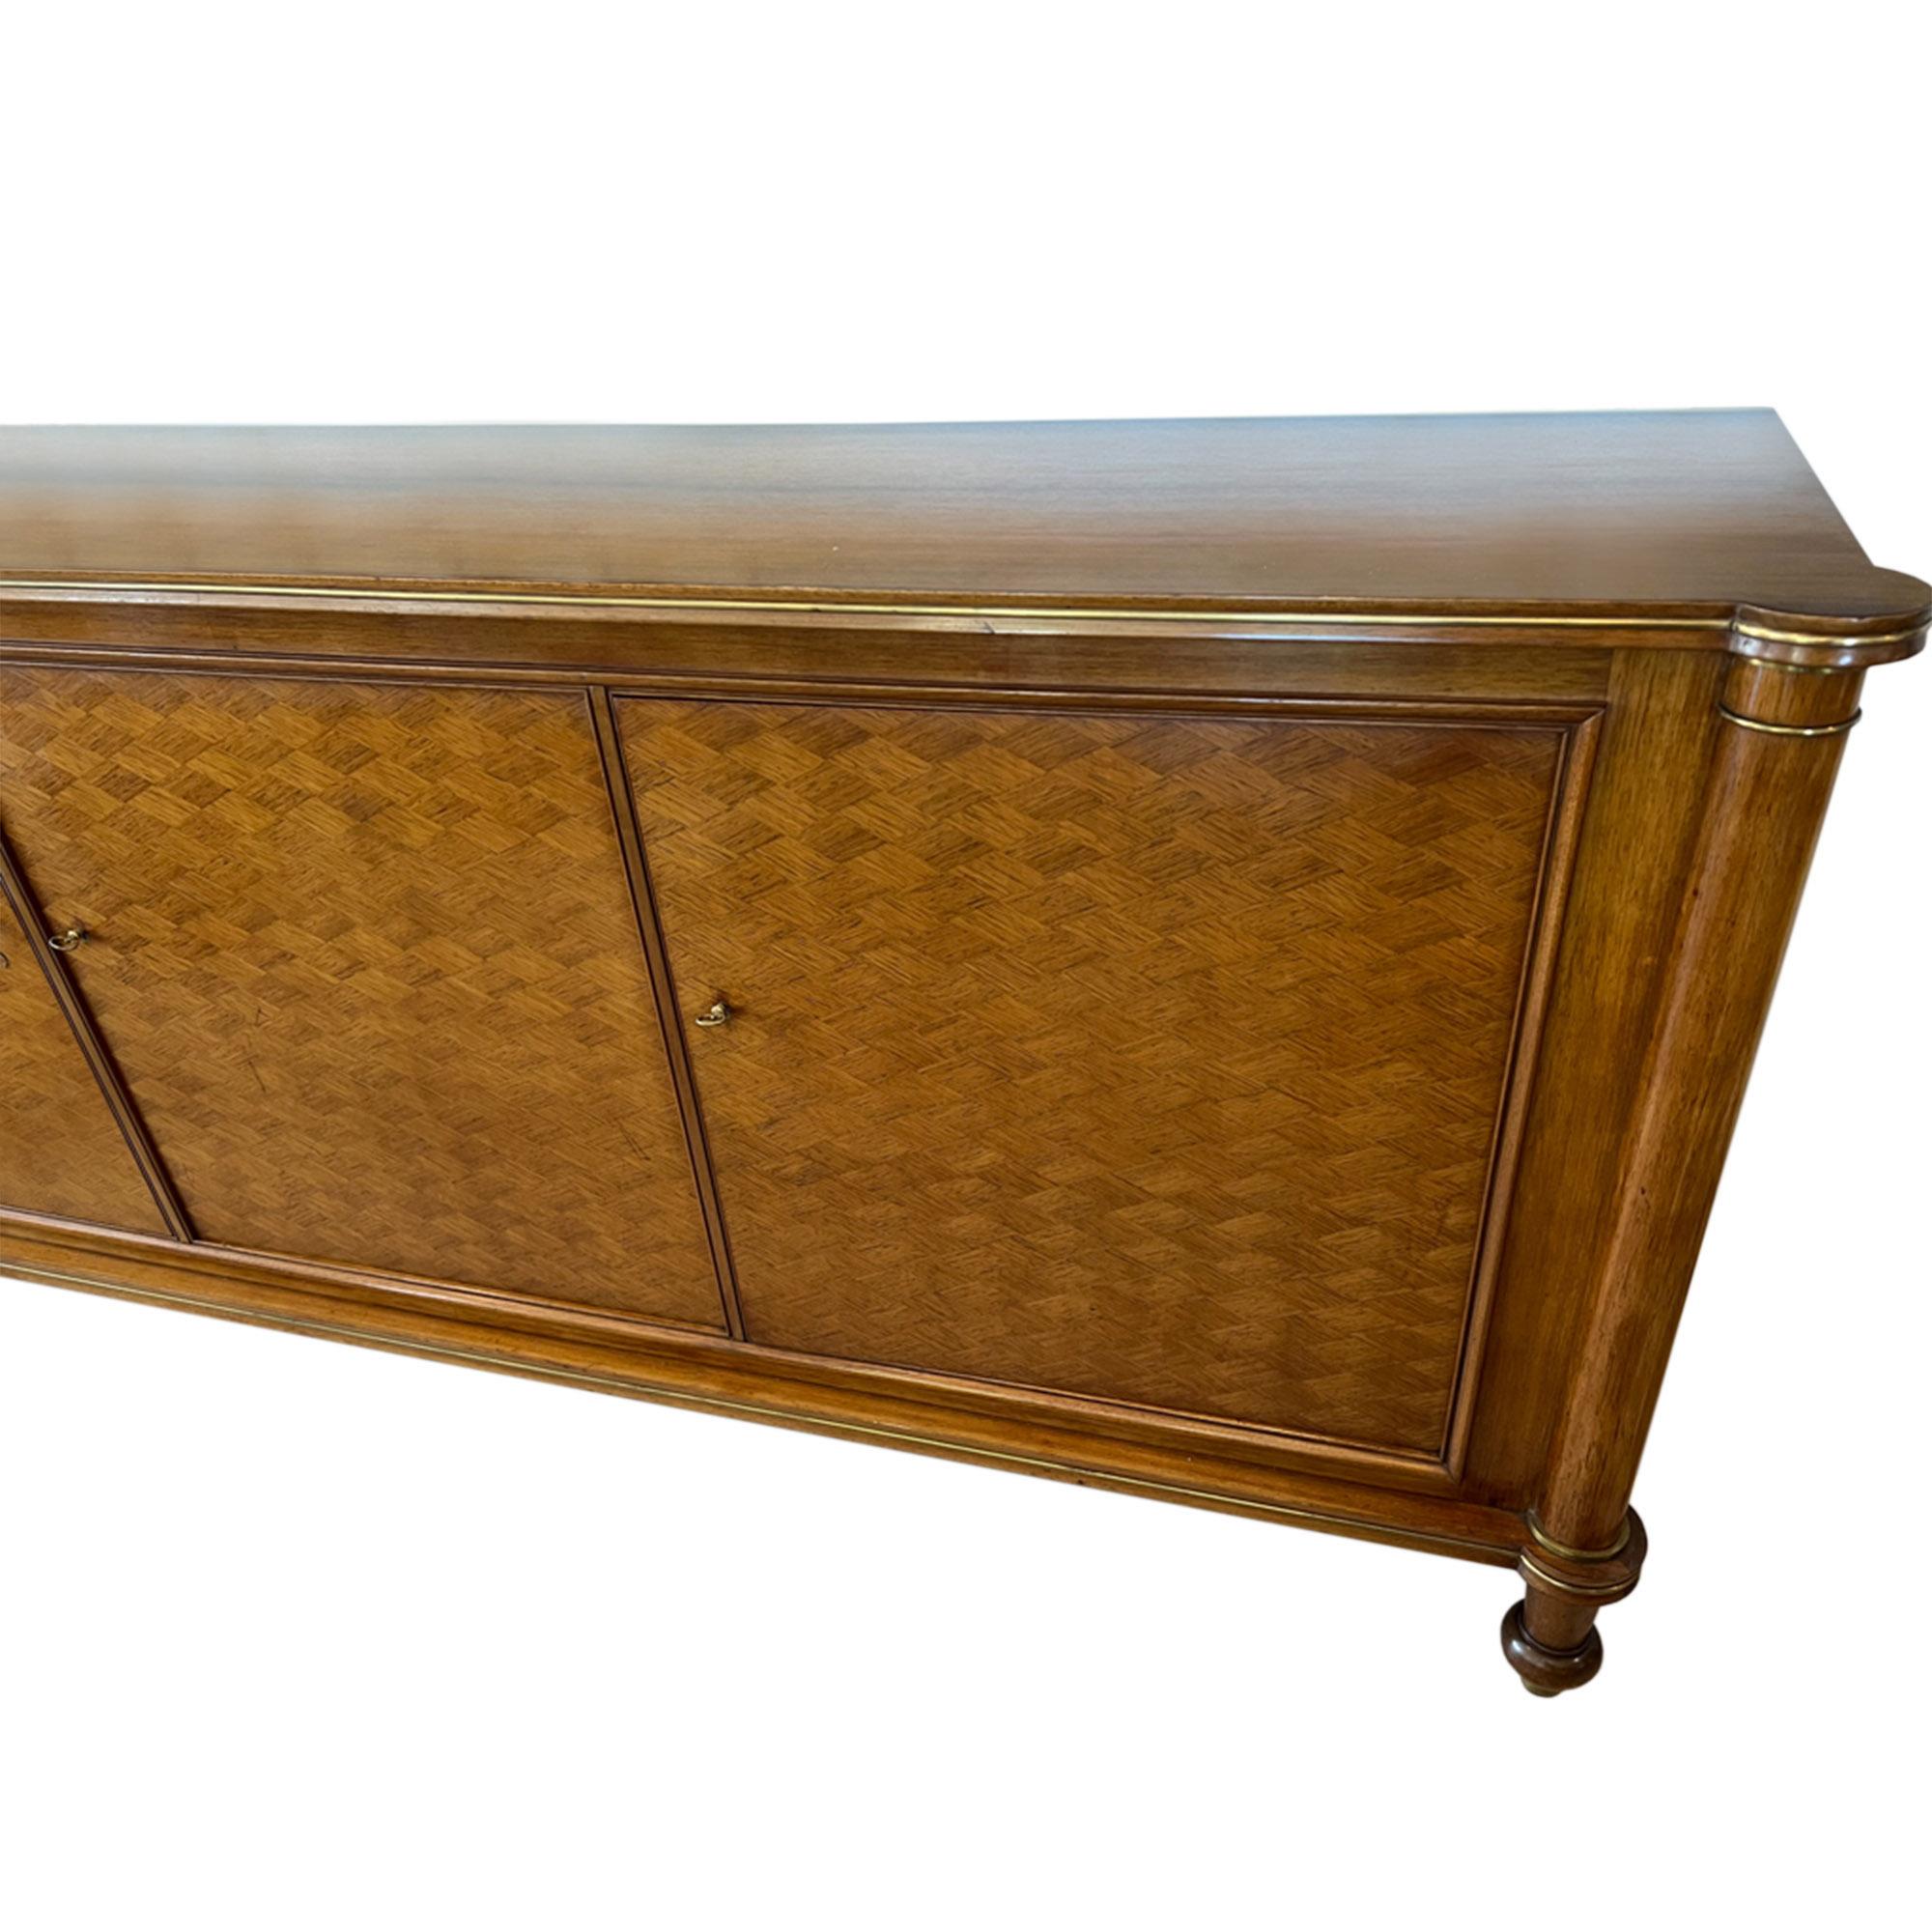 A beautiful sideboard designed by Jules Leleu. This piece still retains the original paper label on the back, stating the serial number, it's signed and dated 1956. 

This piece has 3 diamond lozenge pattern parquetry doors, with column supports